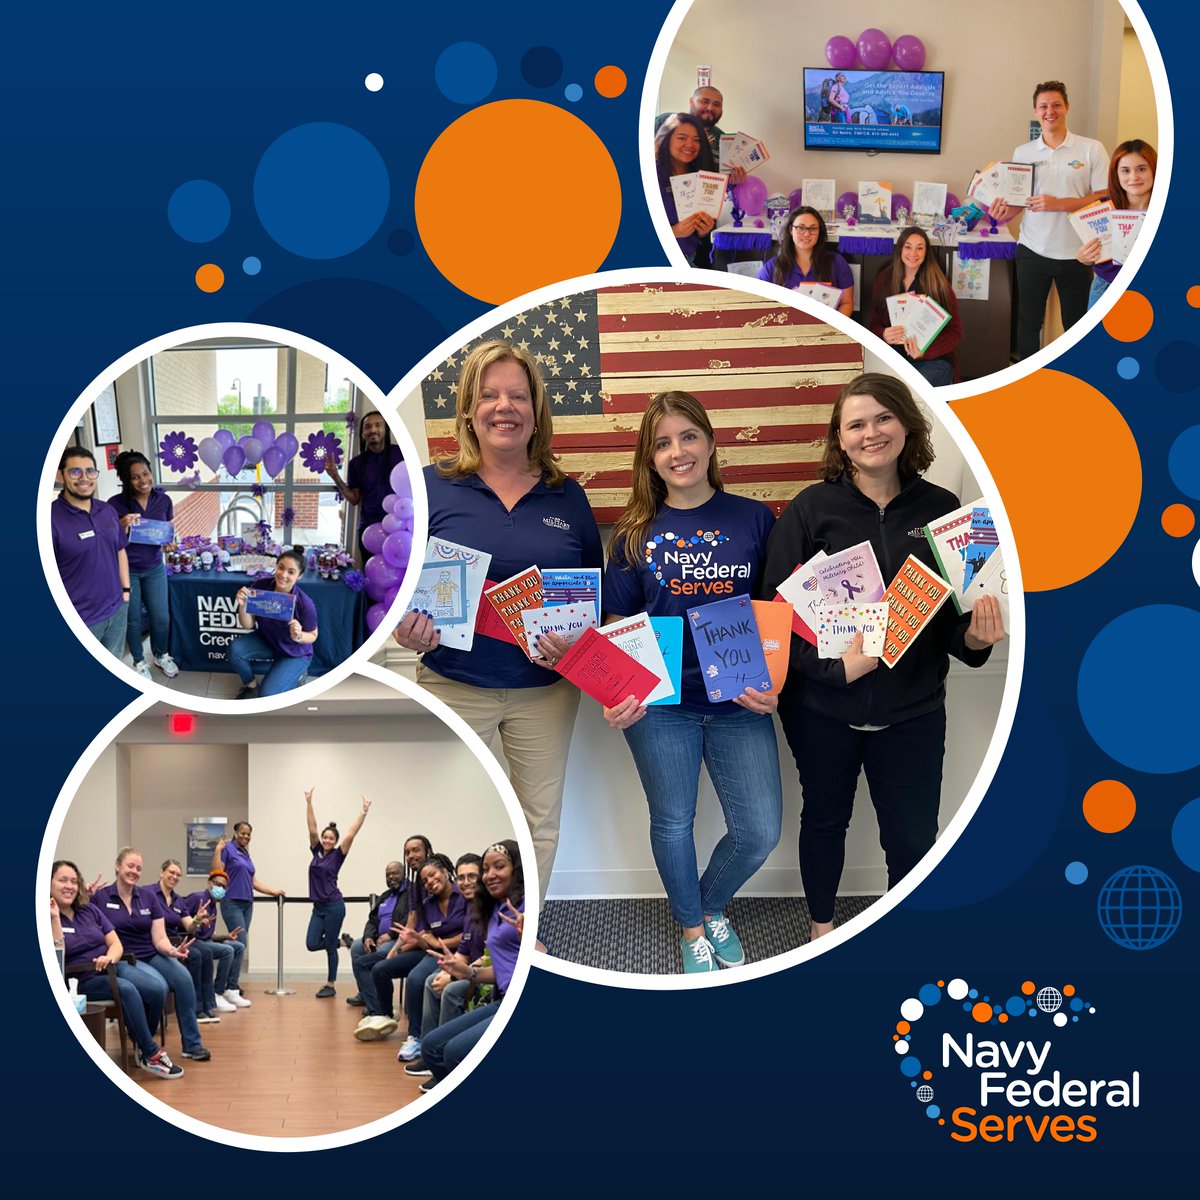 ✔Courageous ✔Resilient ✔Brave It’s Month of the Military Child and we’re joining forces with @OurMilitaryKids to write letters to the little ones showing our support for the challenges and sacrifices that come with military life. We ♥ you! #NavyFederalServes